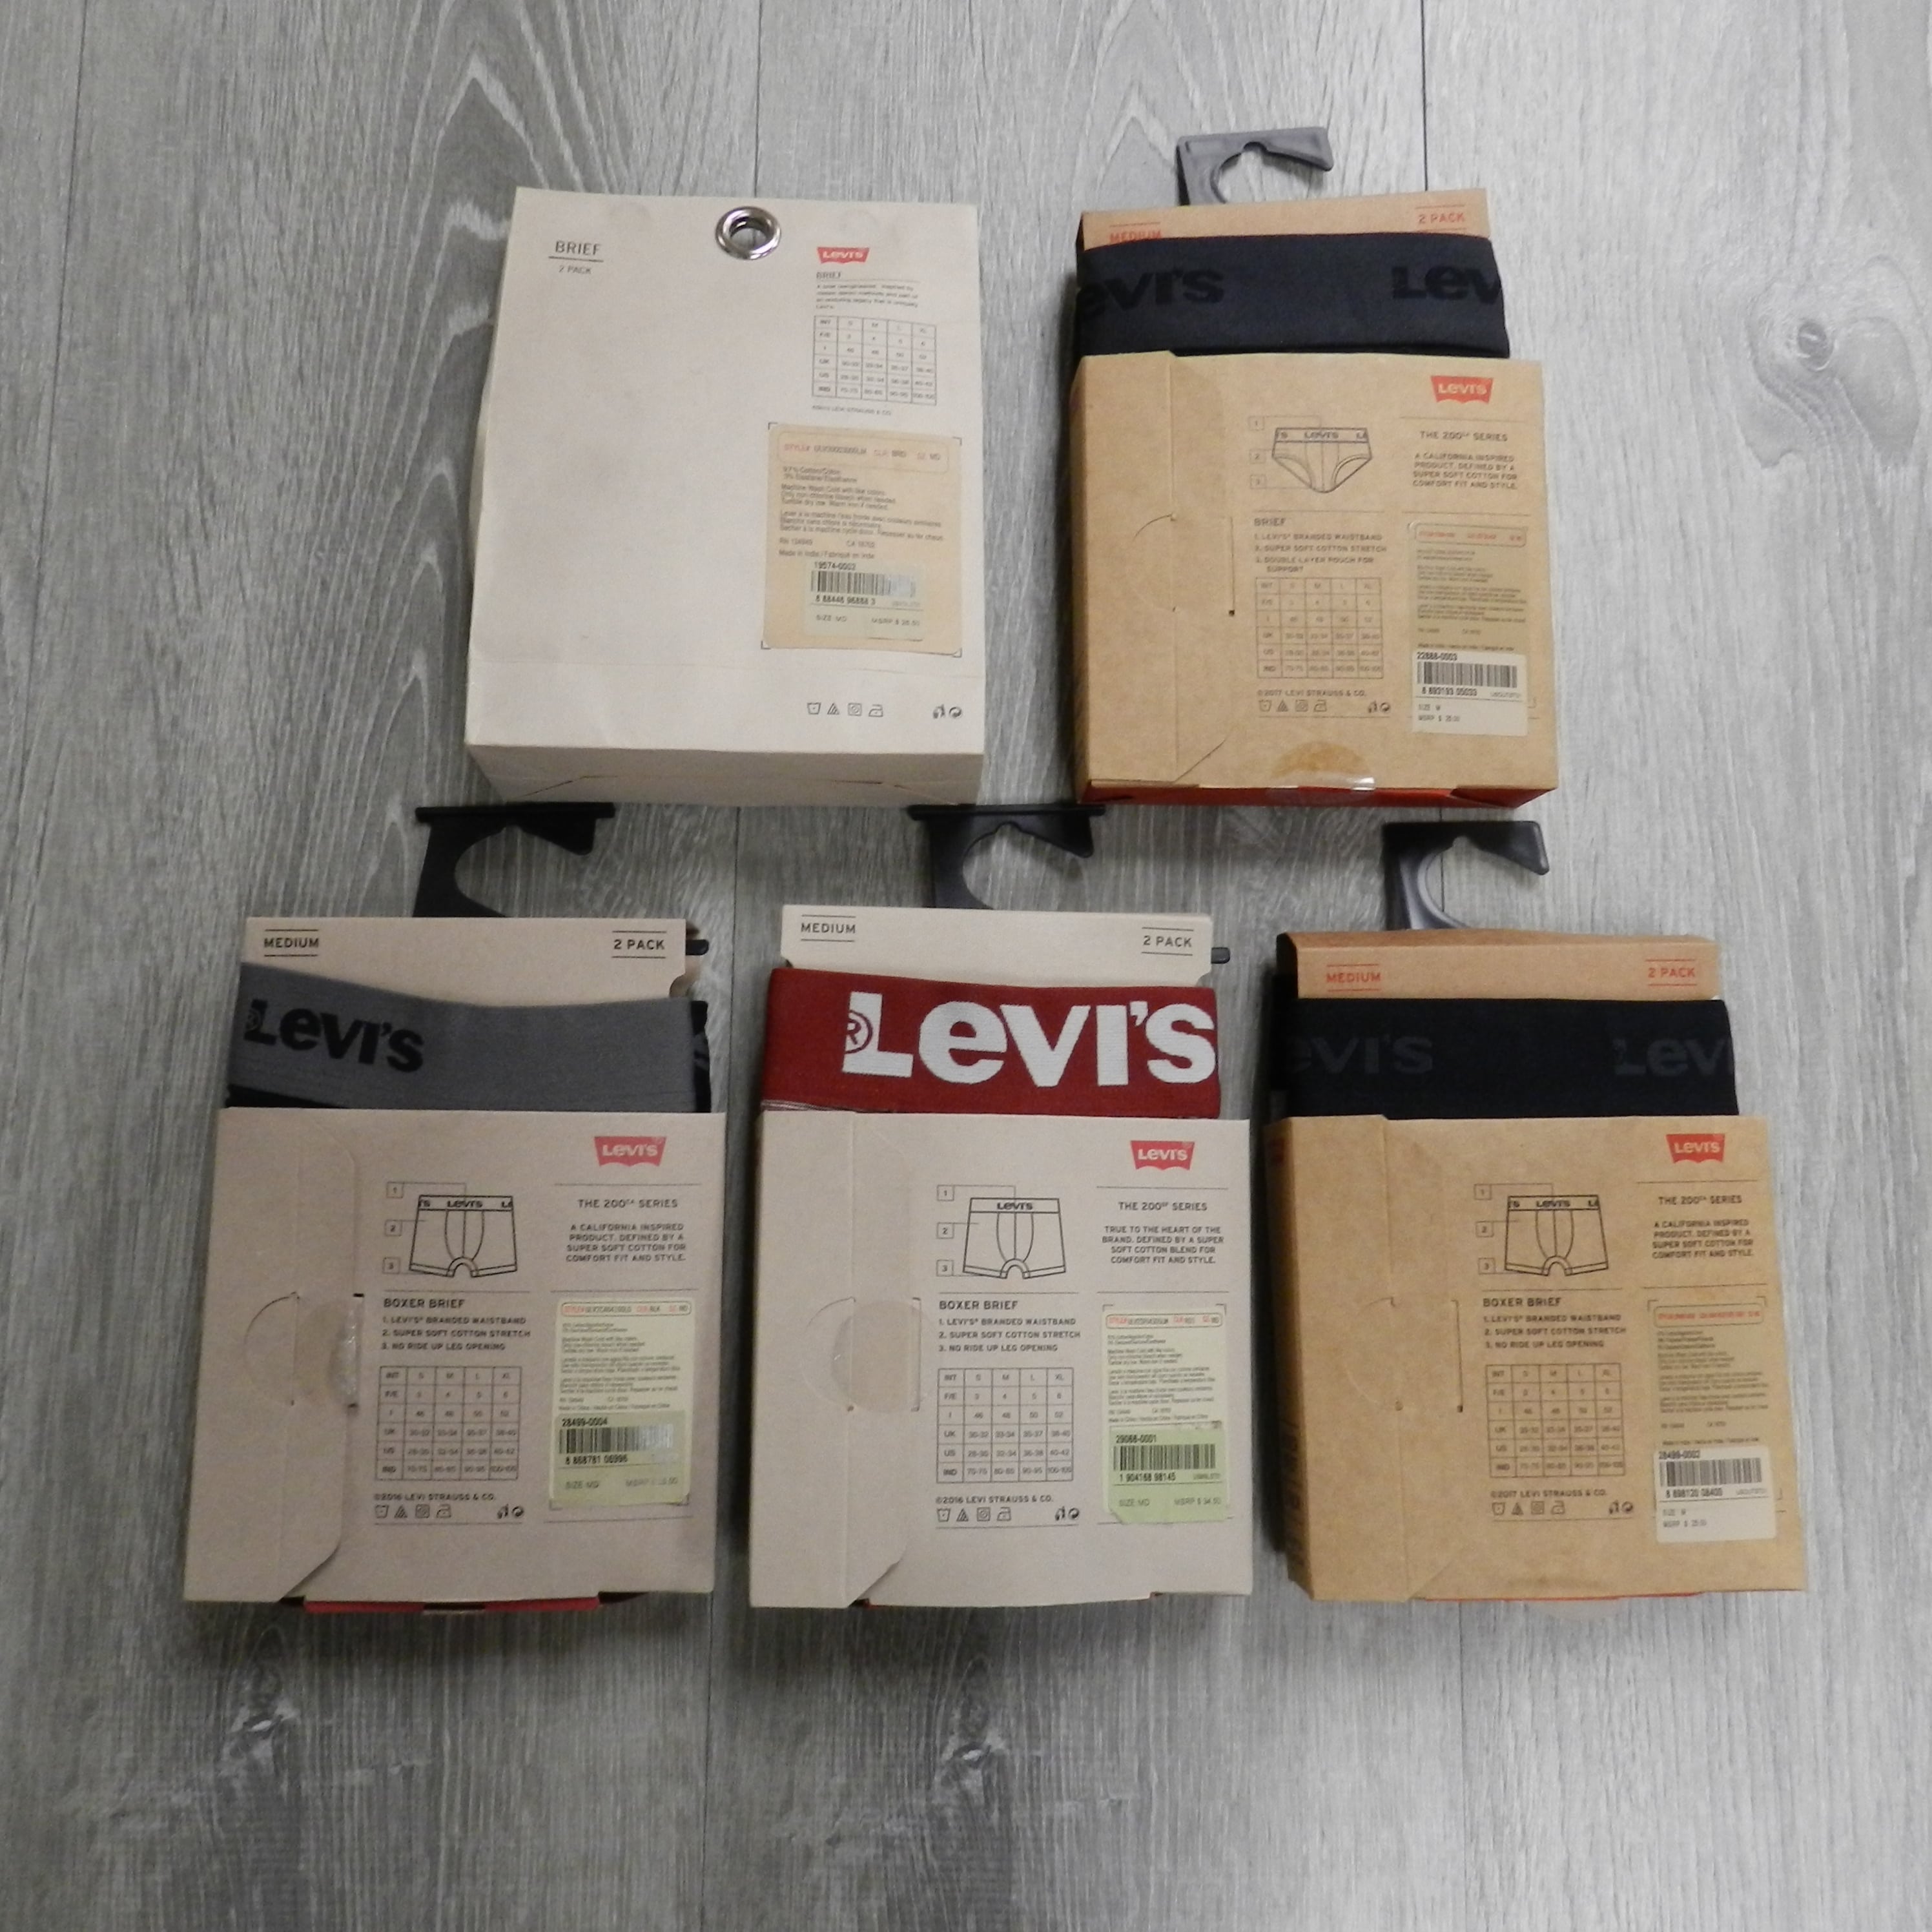 levi's boxers 3 pack